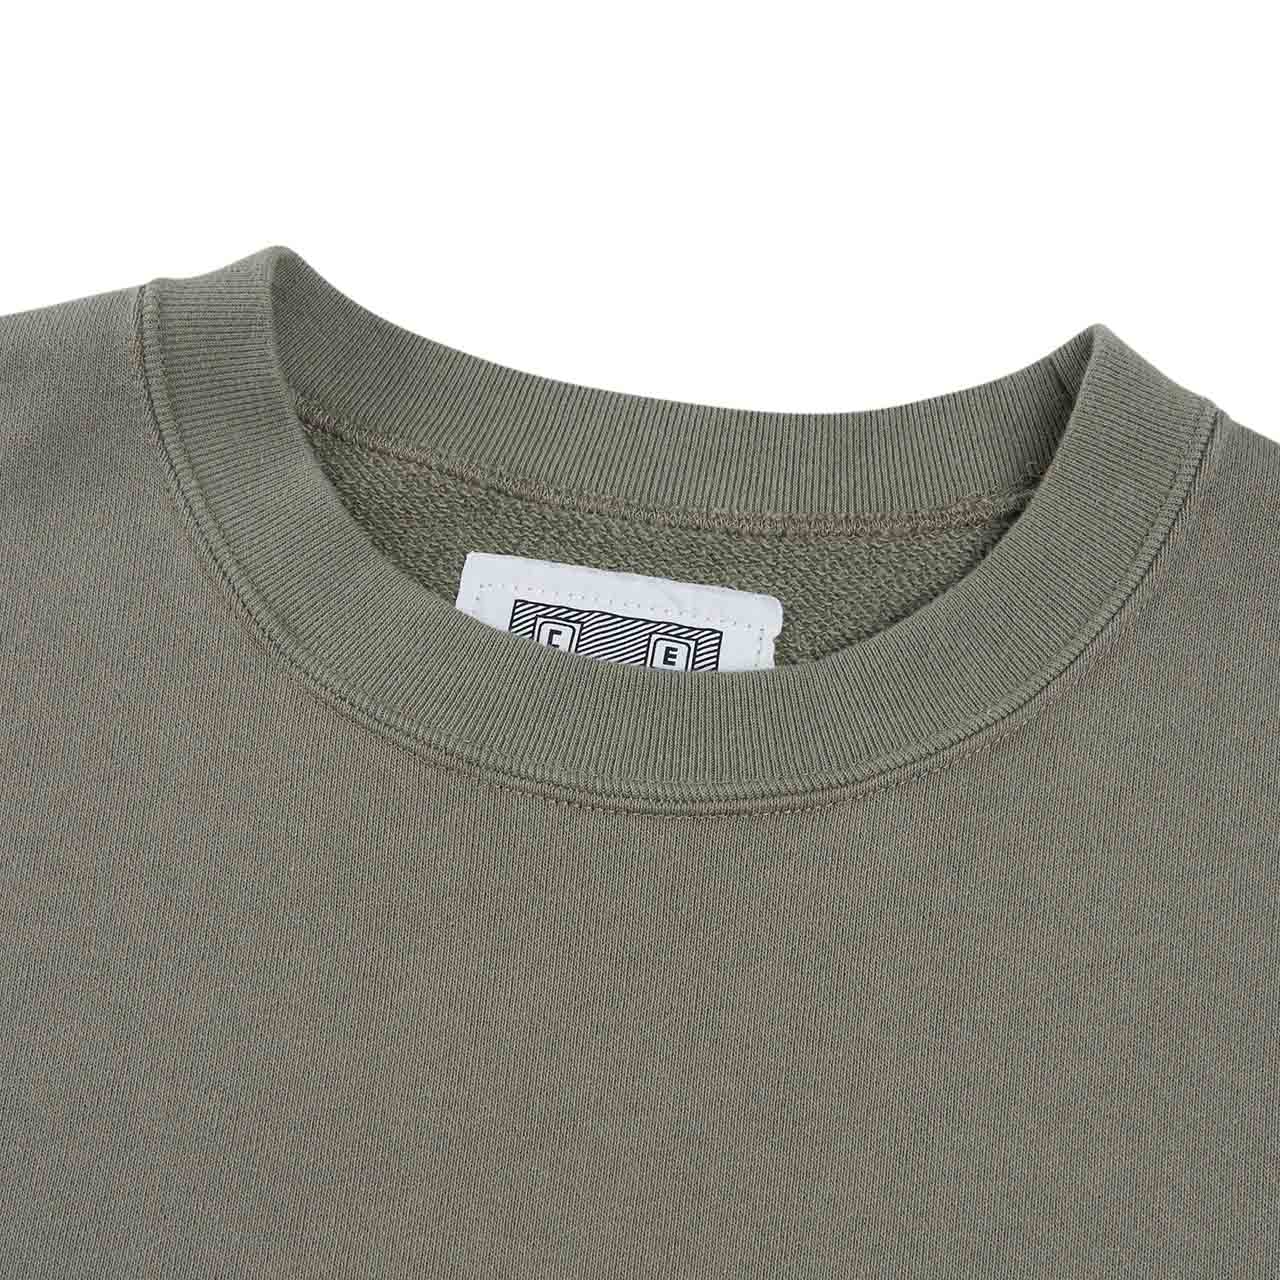 cav empt not identical to crew neck (green) - a.plus store